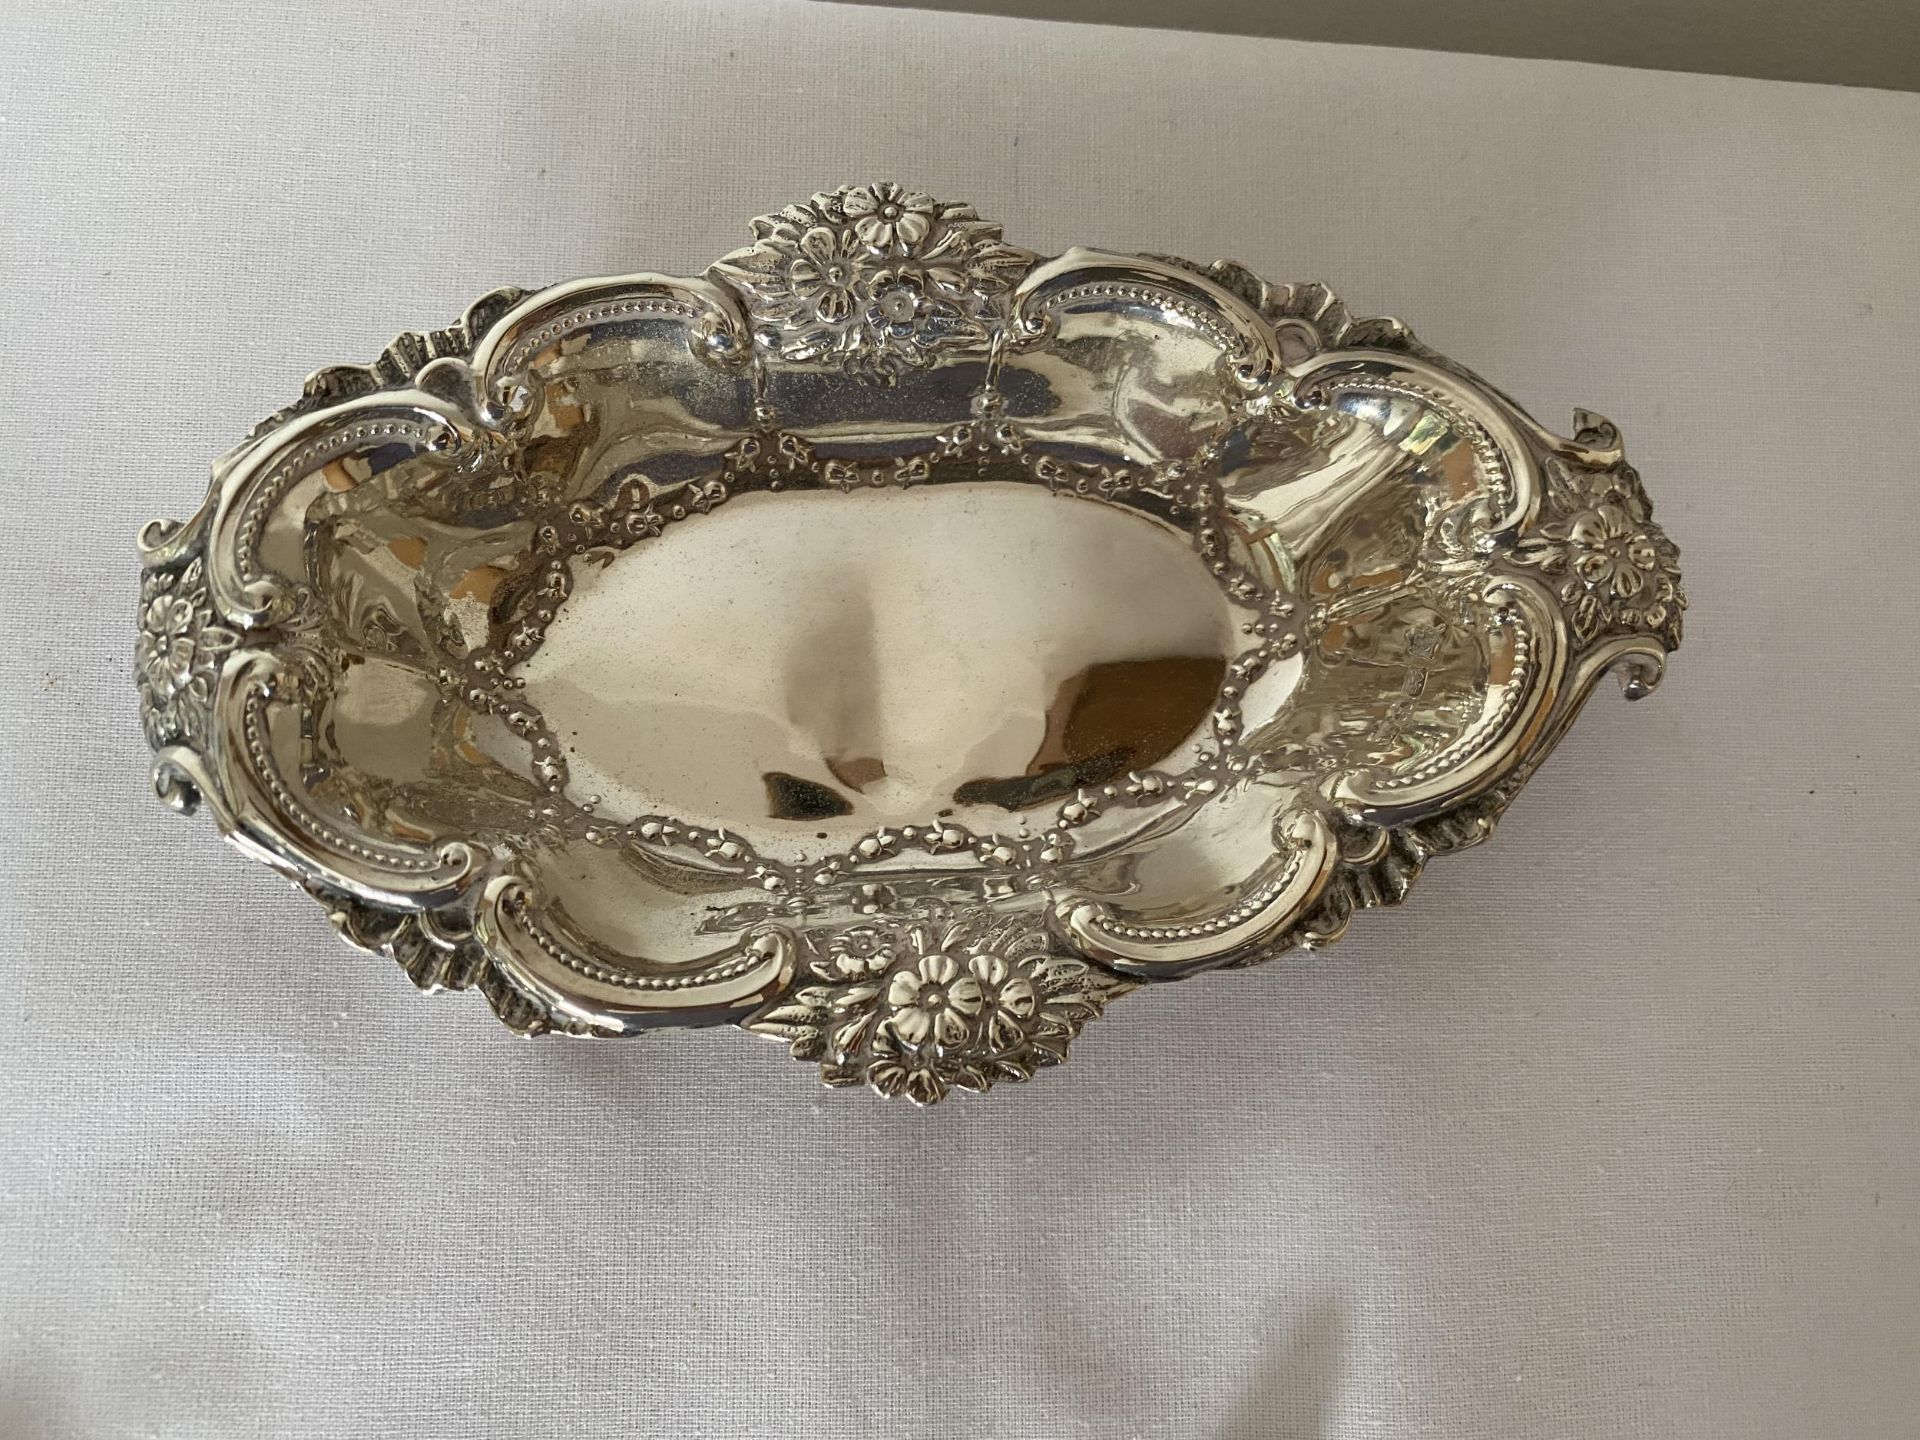 A 1901 HALLMARKED CHESTER SILVER DISH, MAKER GEORGE NATHAN & RIDLEY HAYES, GROSS WEIGHT 27 GRAMS - Image 4 of 21